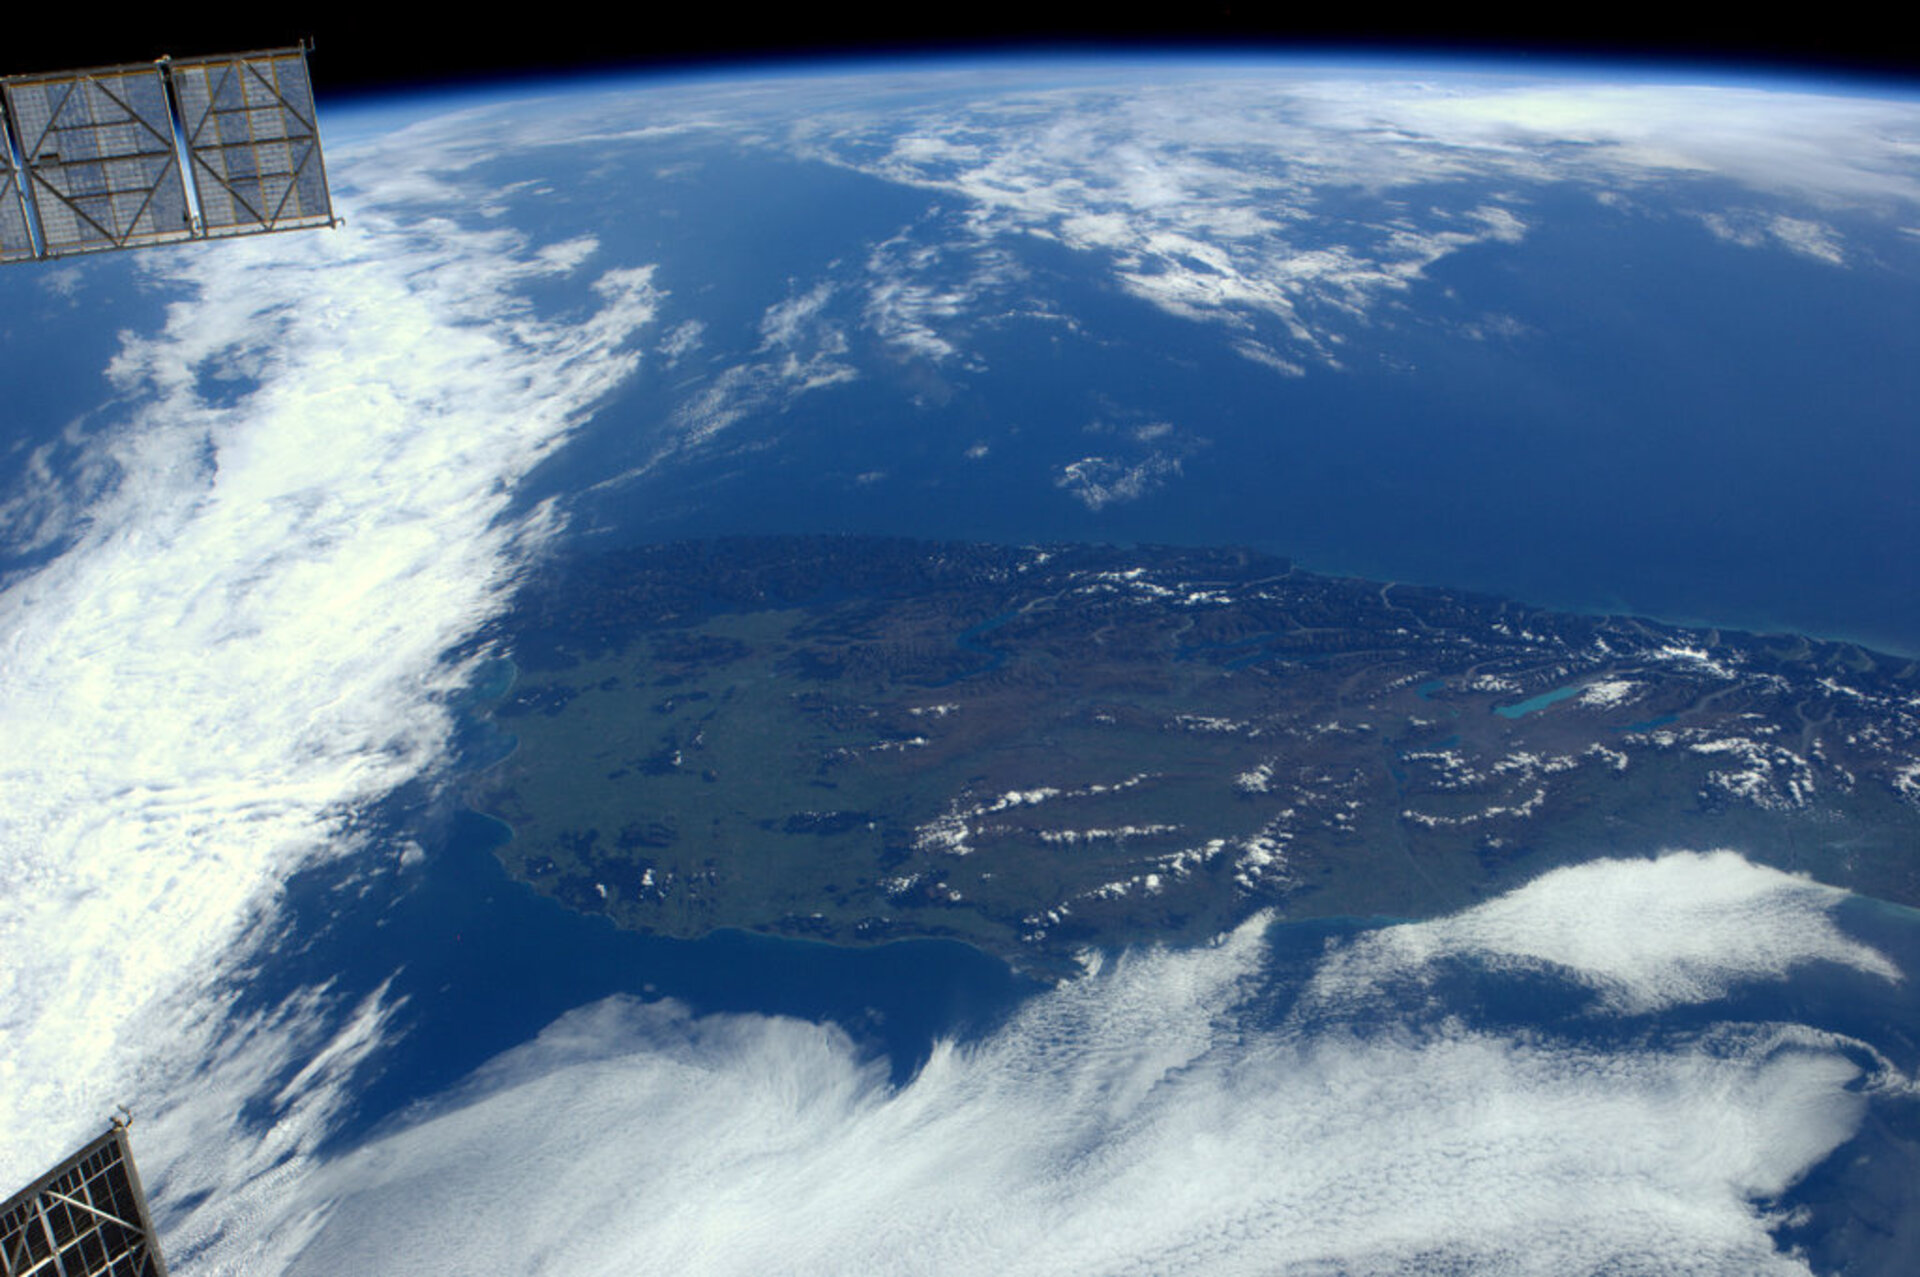 South Island, New Zealand, seen from the ISS